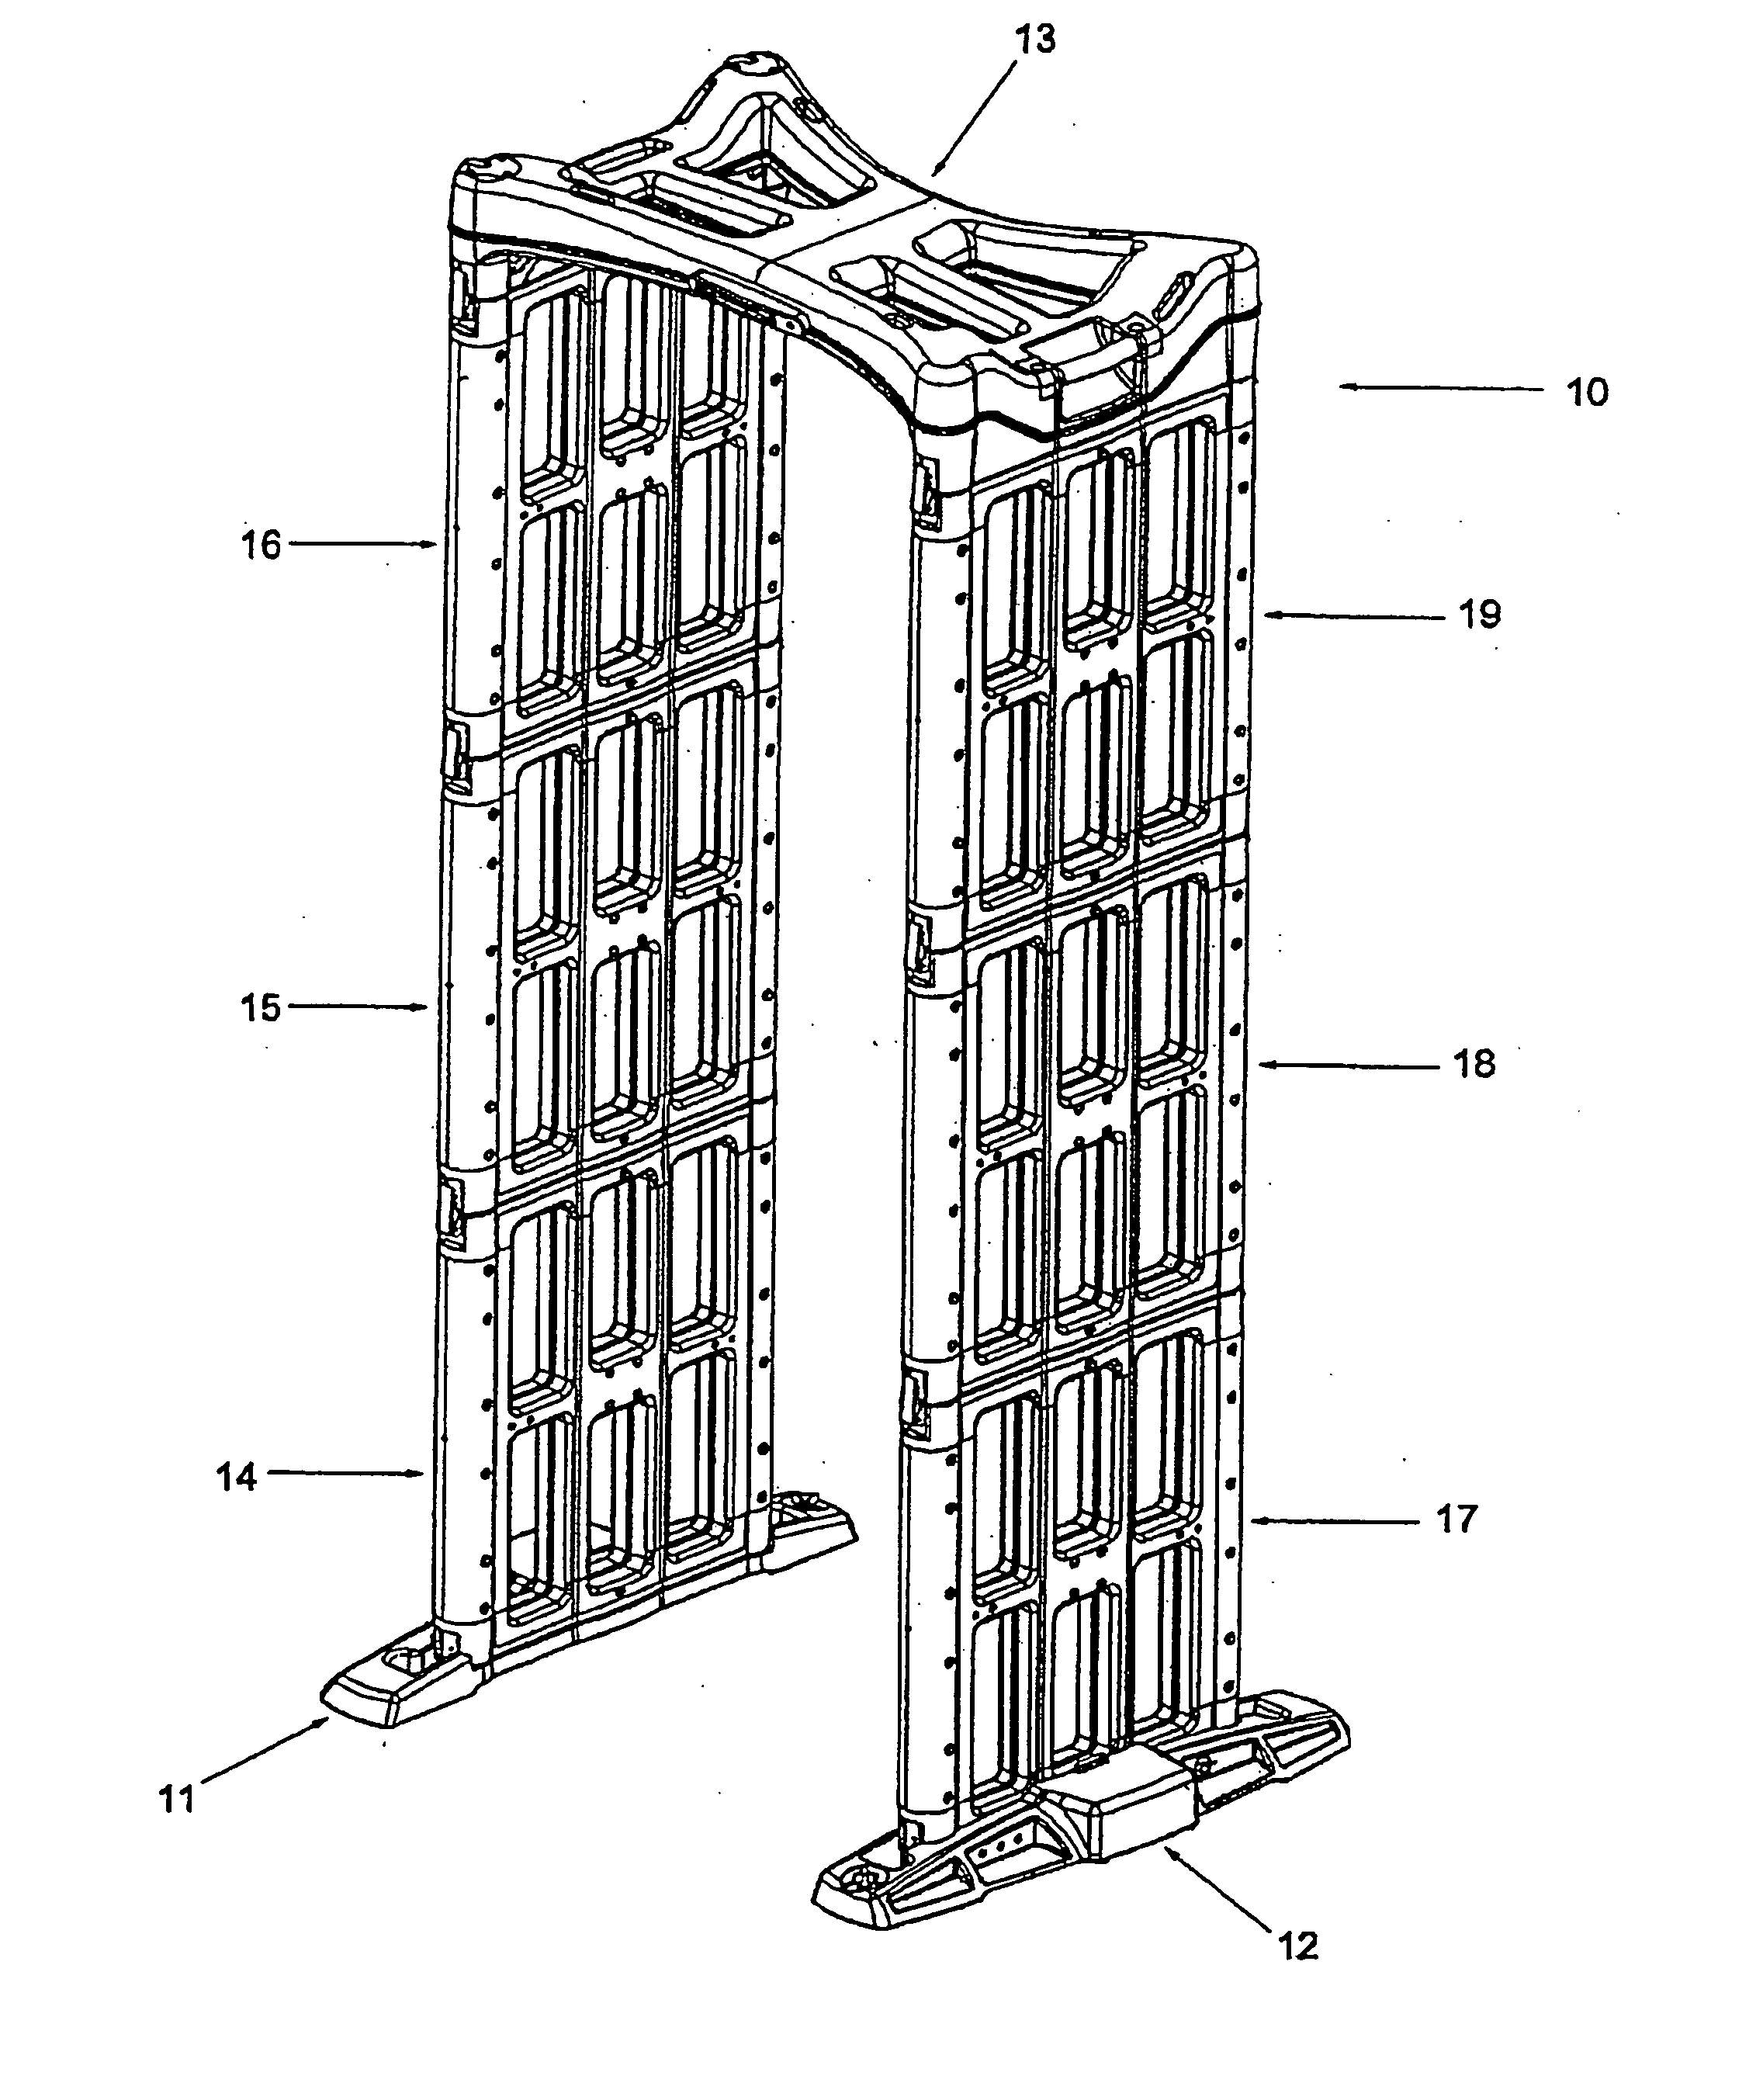 Systems and methods for a portable walk-through metal detector